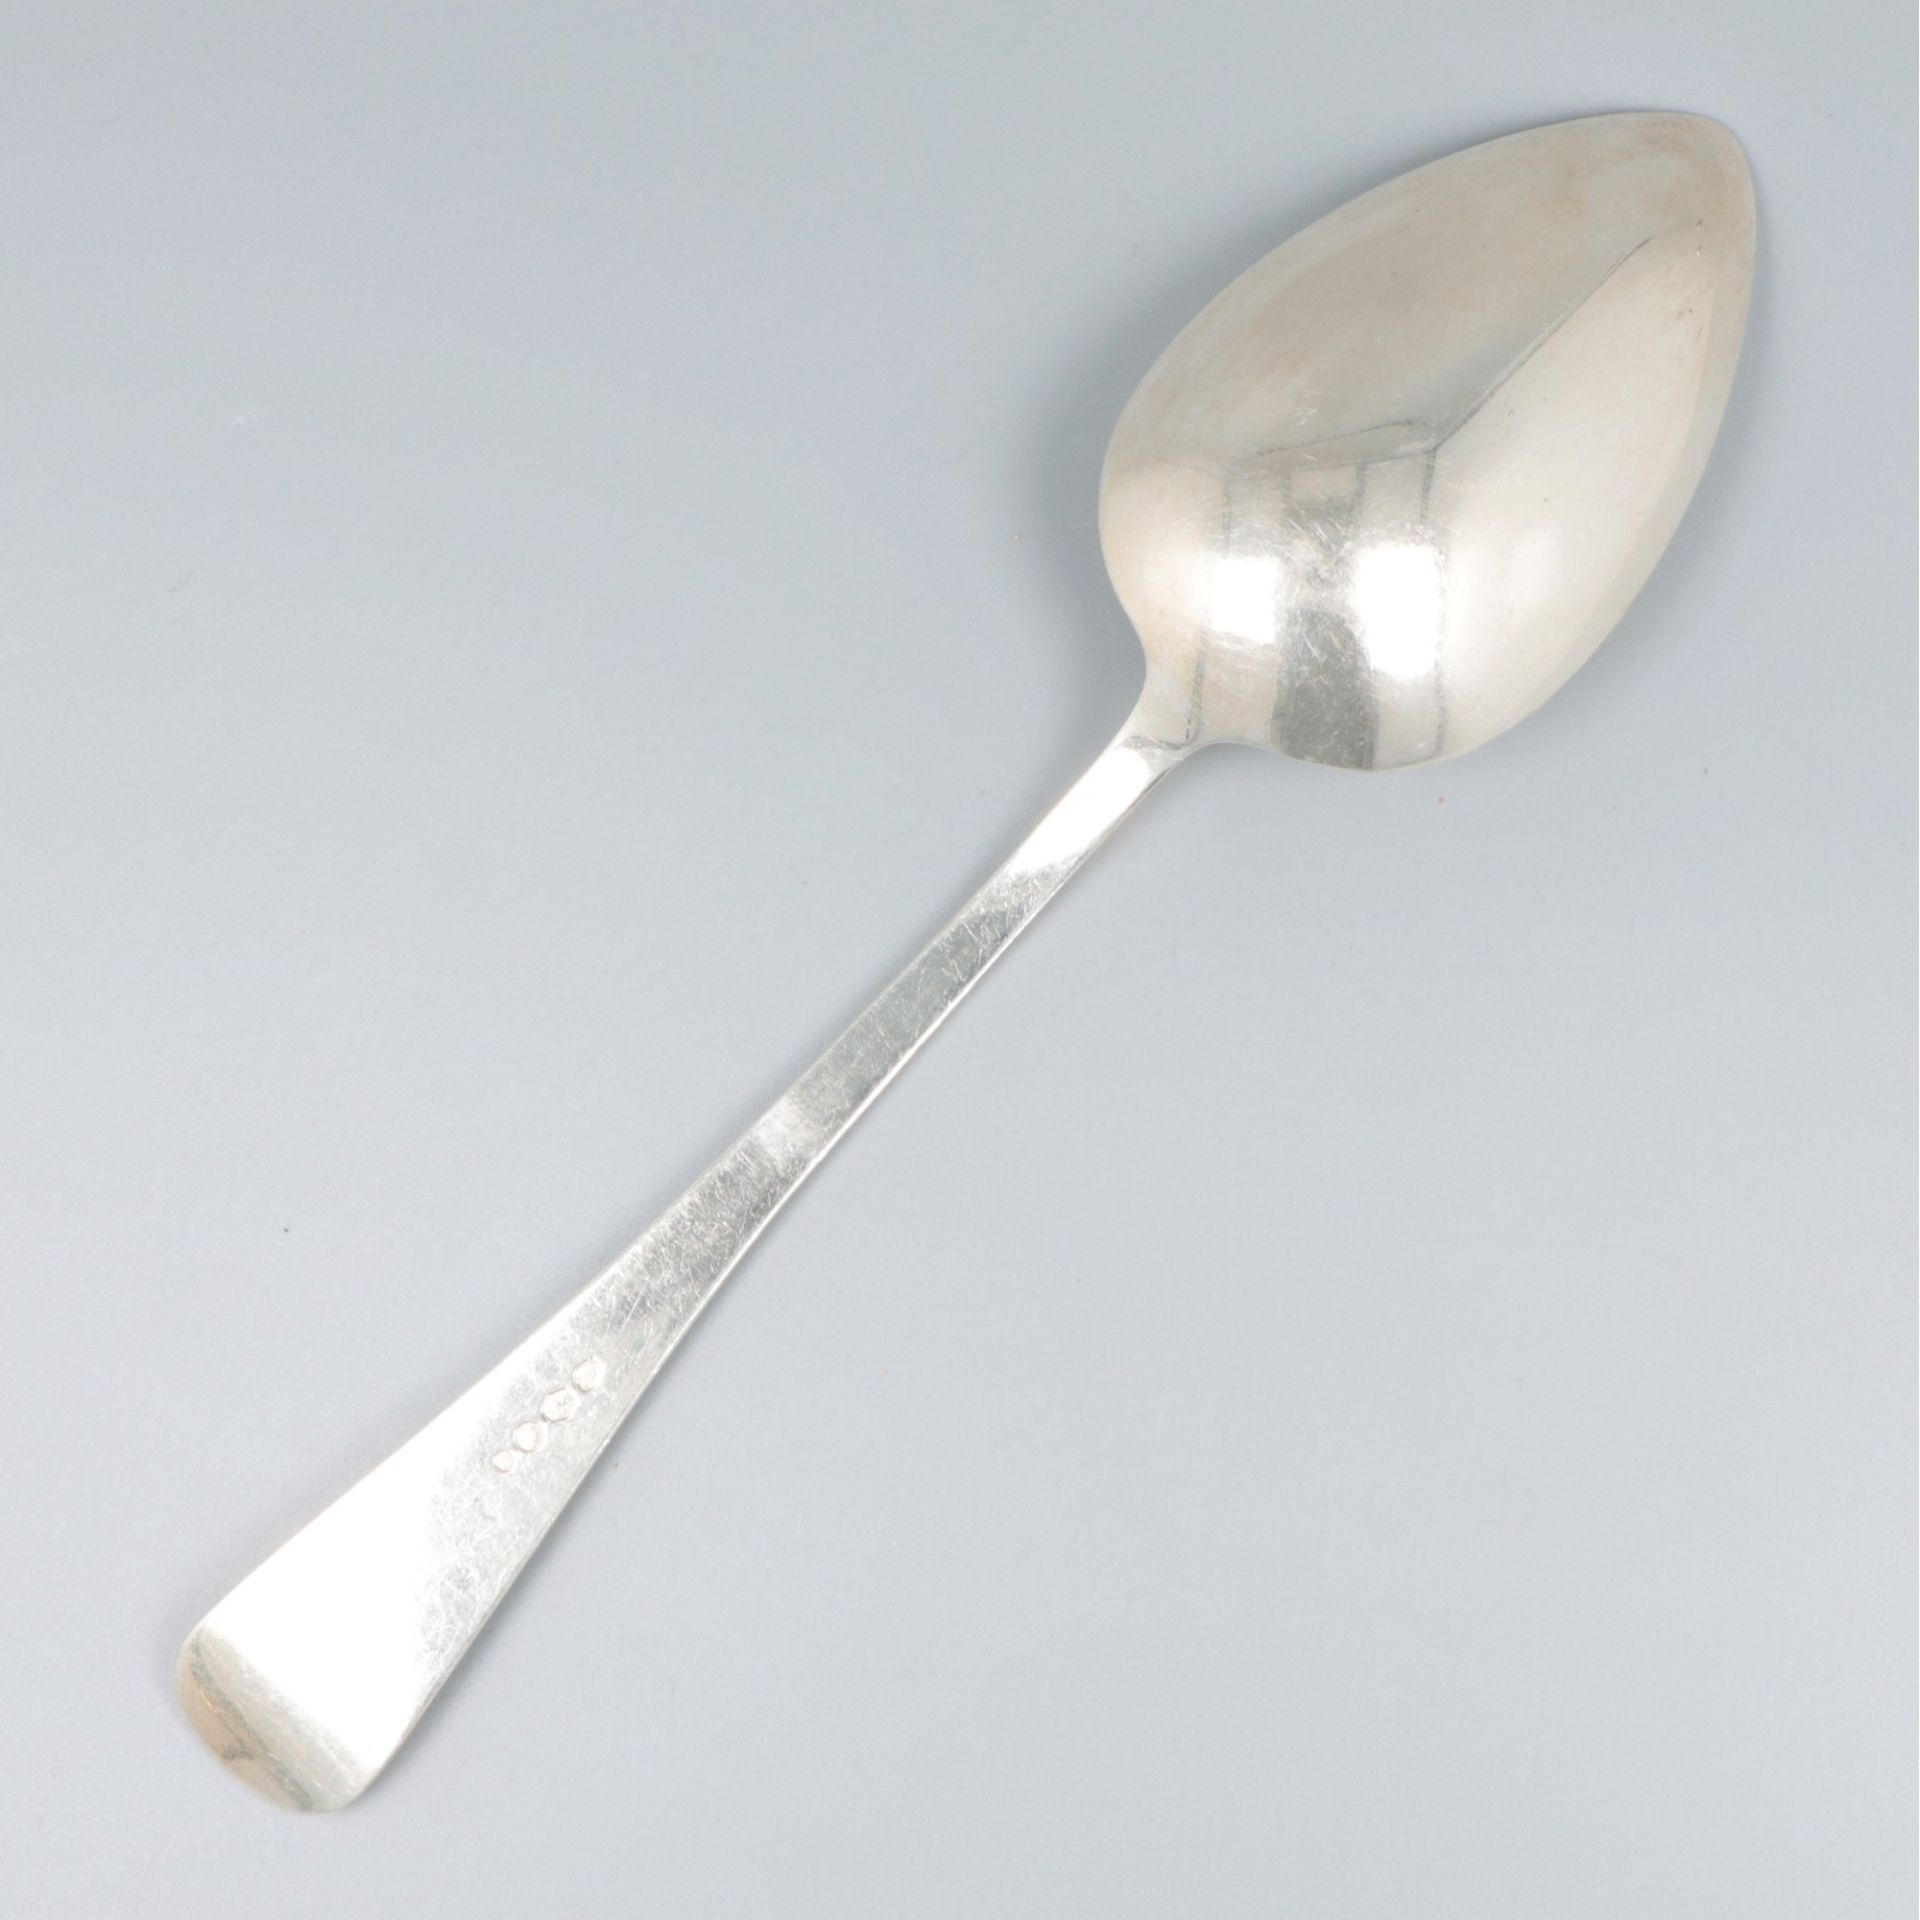 2-piece set vegetable serving spoons "Haags Lofje", silver. - Image 3 of 6